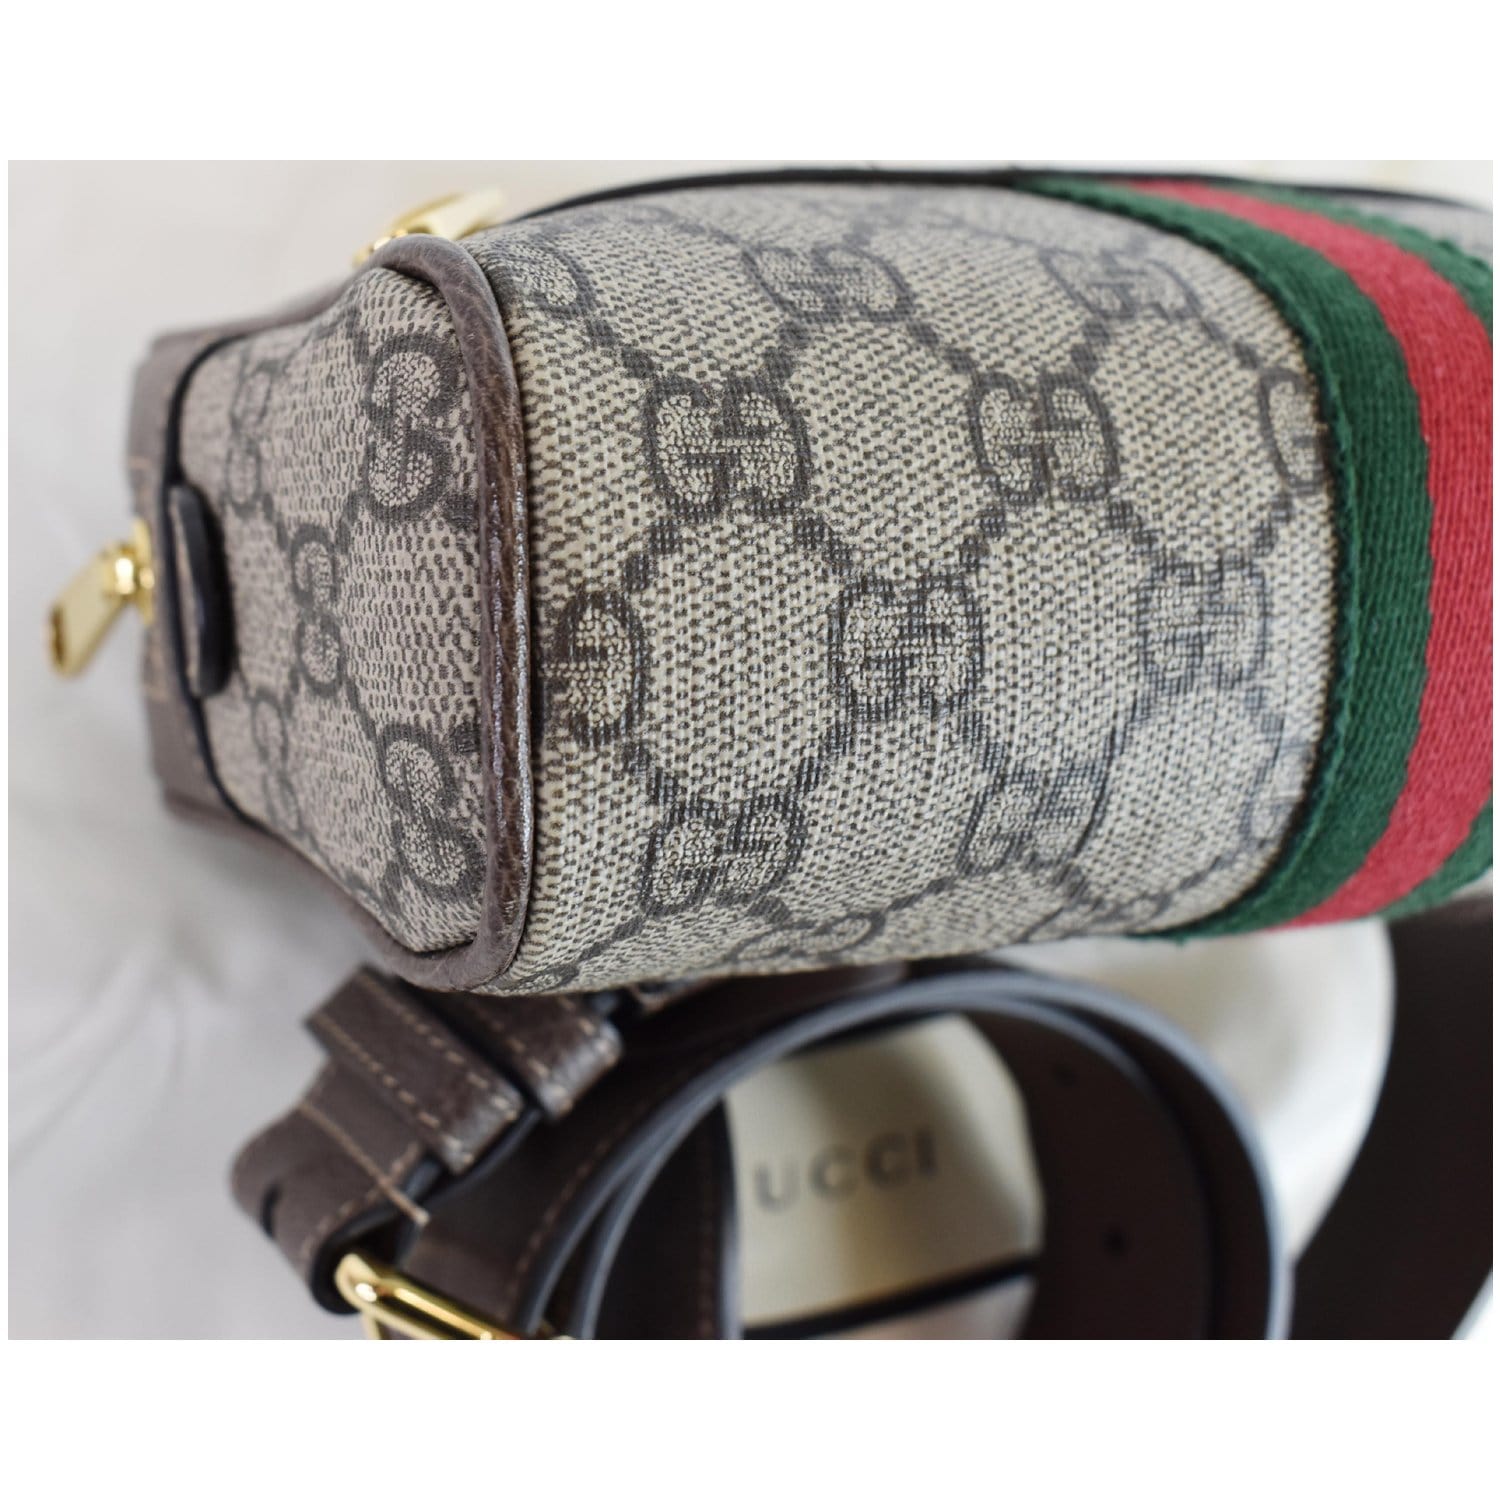 Gucci Web Strap Sling Bag GG Coated Canvas Small